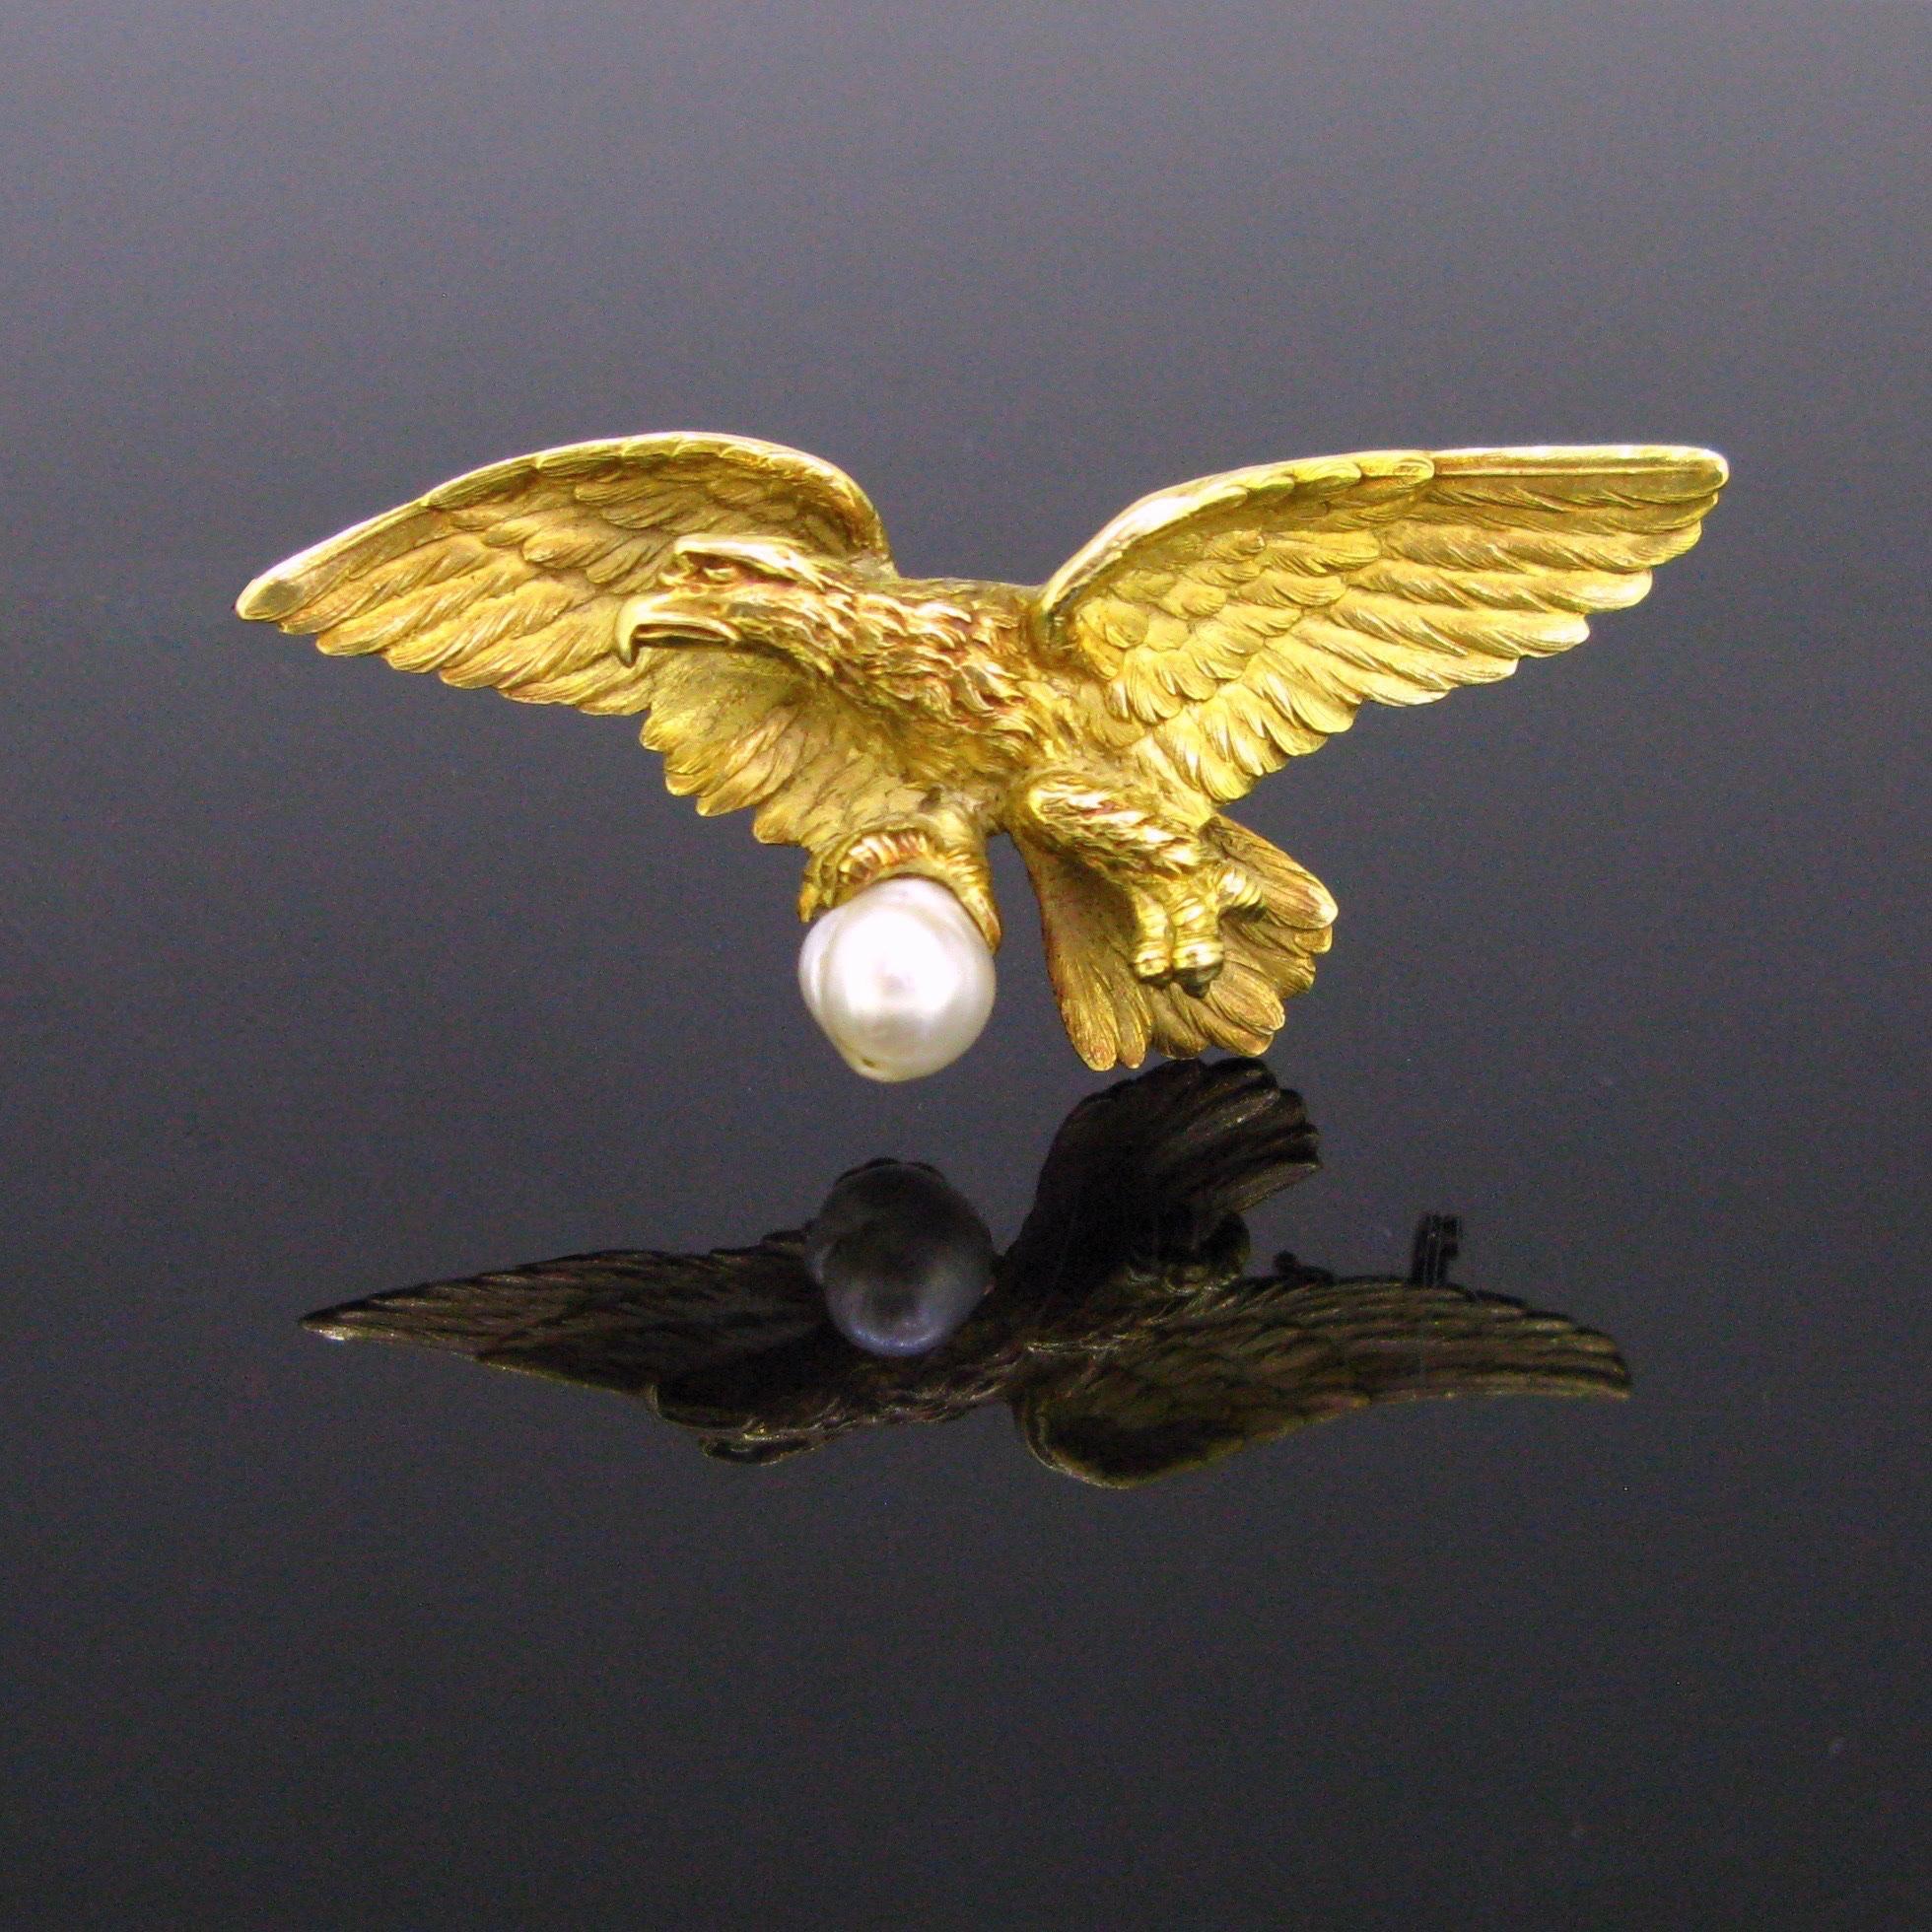 Weight:	18.73gr


Metal:		18kt Yellow Gold


Stones:	1 Pearl 	
•	Dimensions: 	7.51 x 7.69mm 


Condition:	Very Good


Hallmarks:	French – Eagle’s head
		

Comments: 	This stunning pendant/brooch comes directly from the Art nouveau era.  The